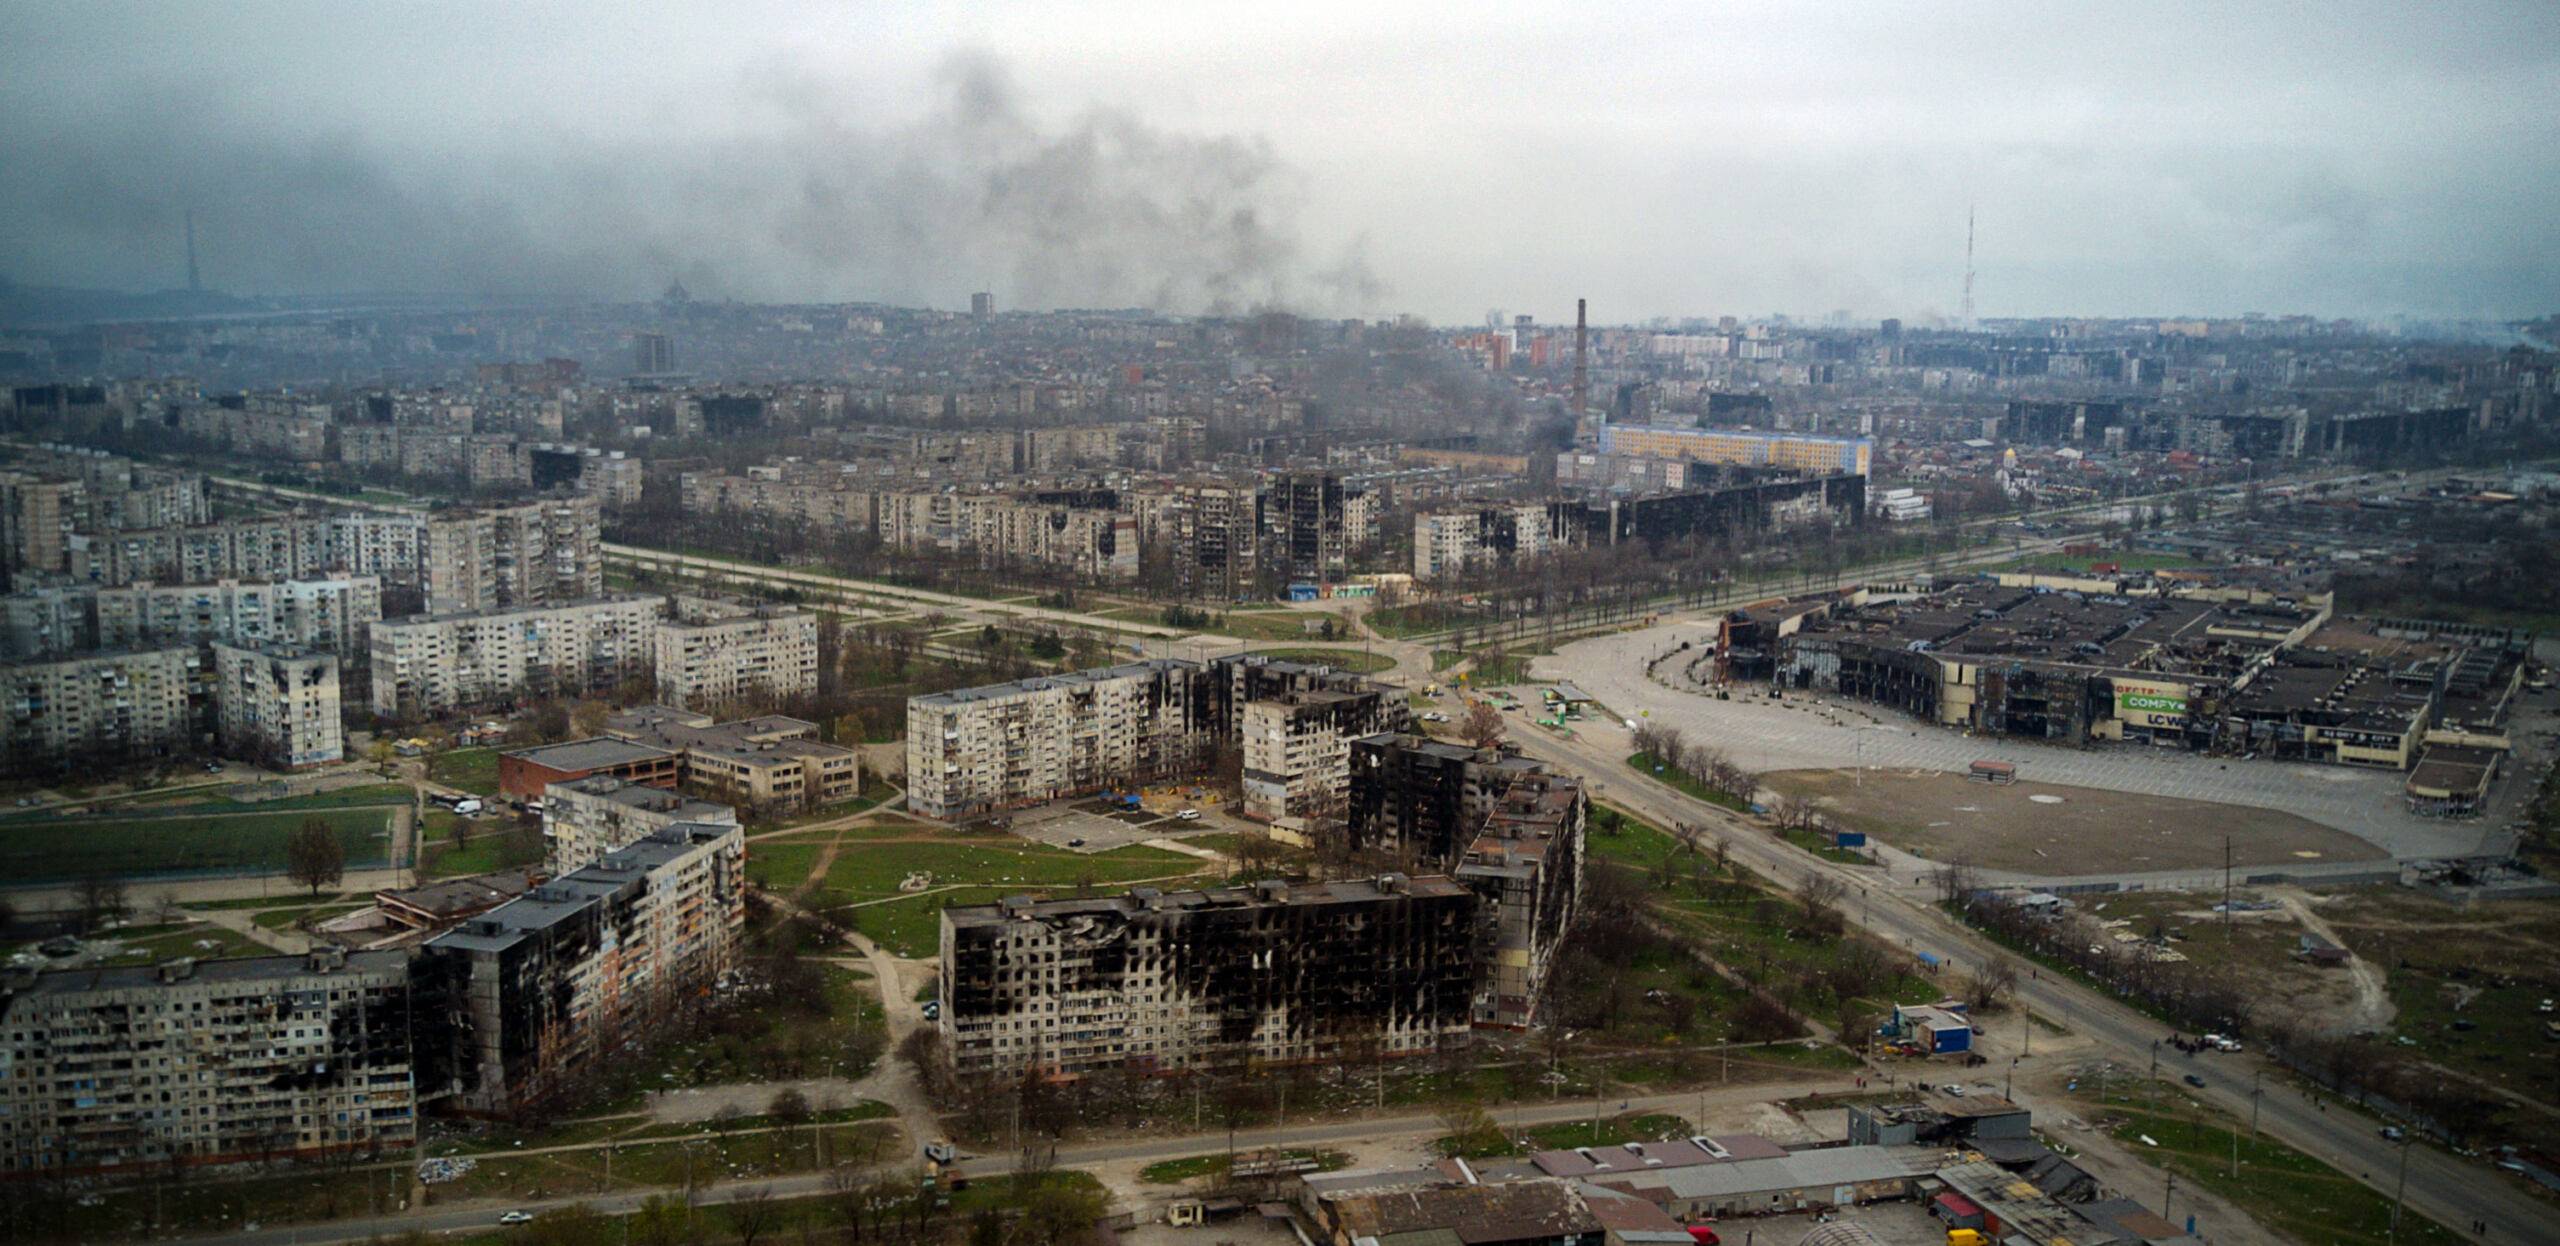 An aerial view taken on April 12, 2022, shows the city of Mariupol, during Russia's military invasion launched on Ukraine. - Russian troops on April 12 intensified their campaign to take the port city of Mariupol, part of an anticipated massive onslaught across eastern Ukraine, as the Russian president made a defiant case for the war on Russia's neighbour. (Photo by Andrey BORODULIN / AFP)